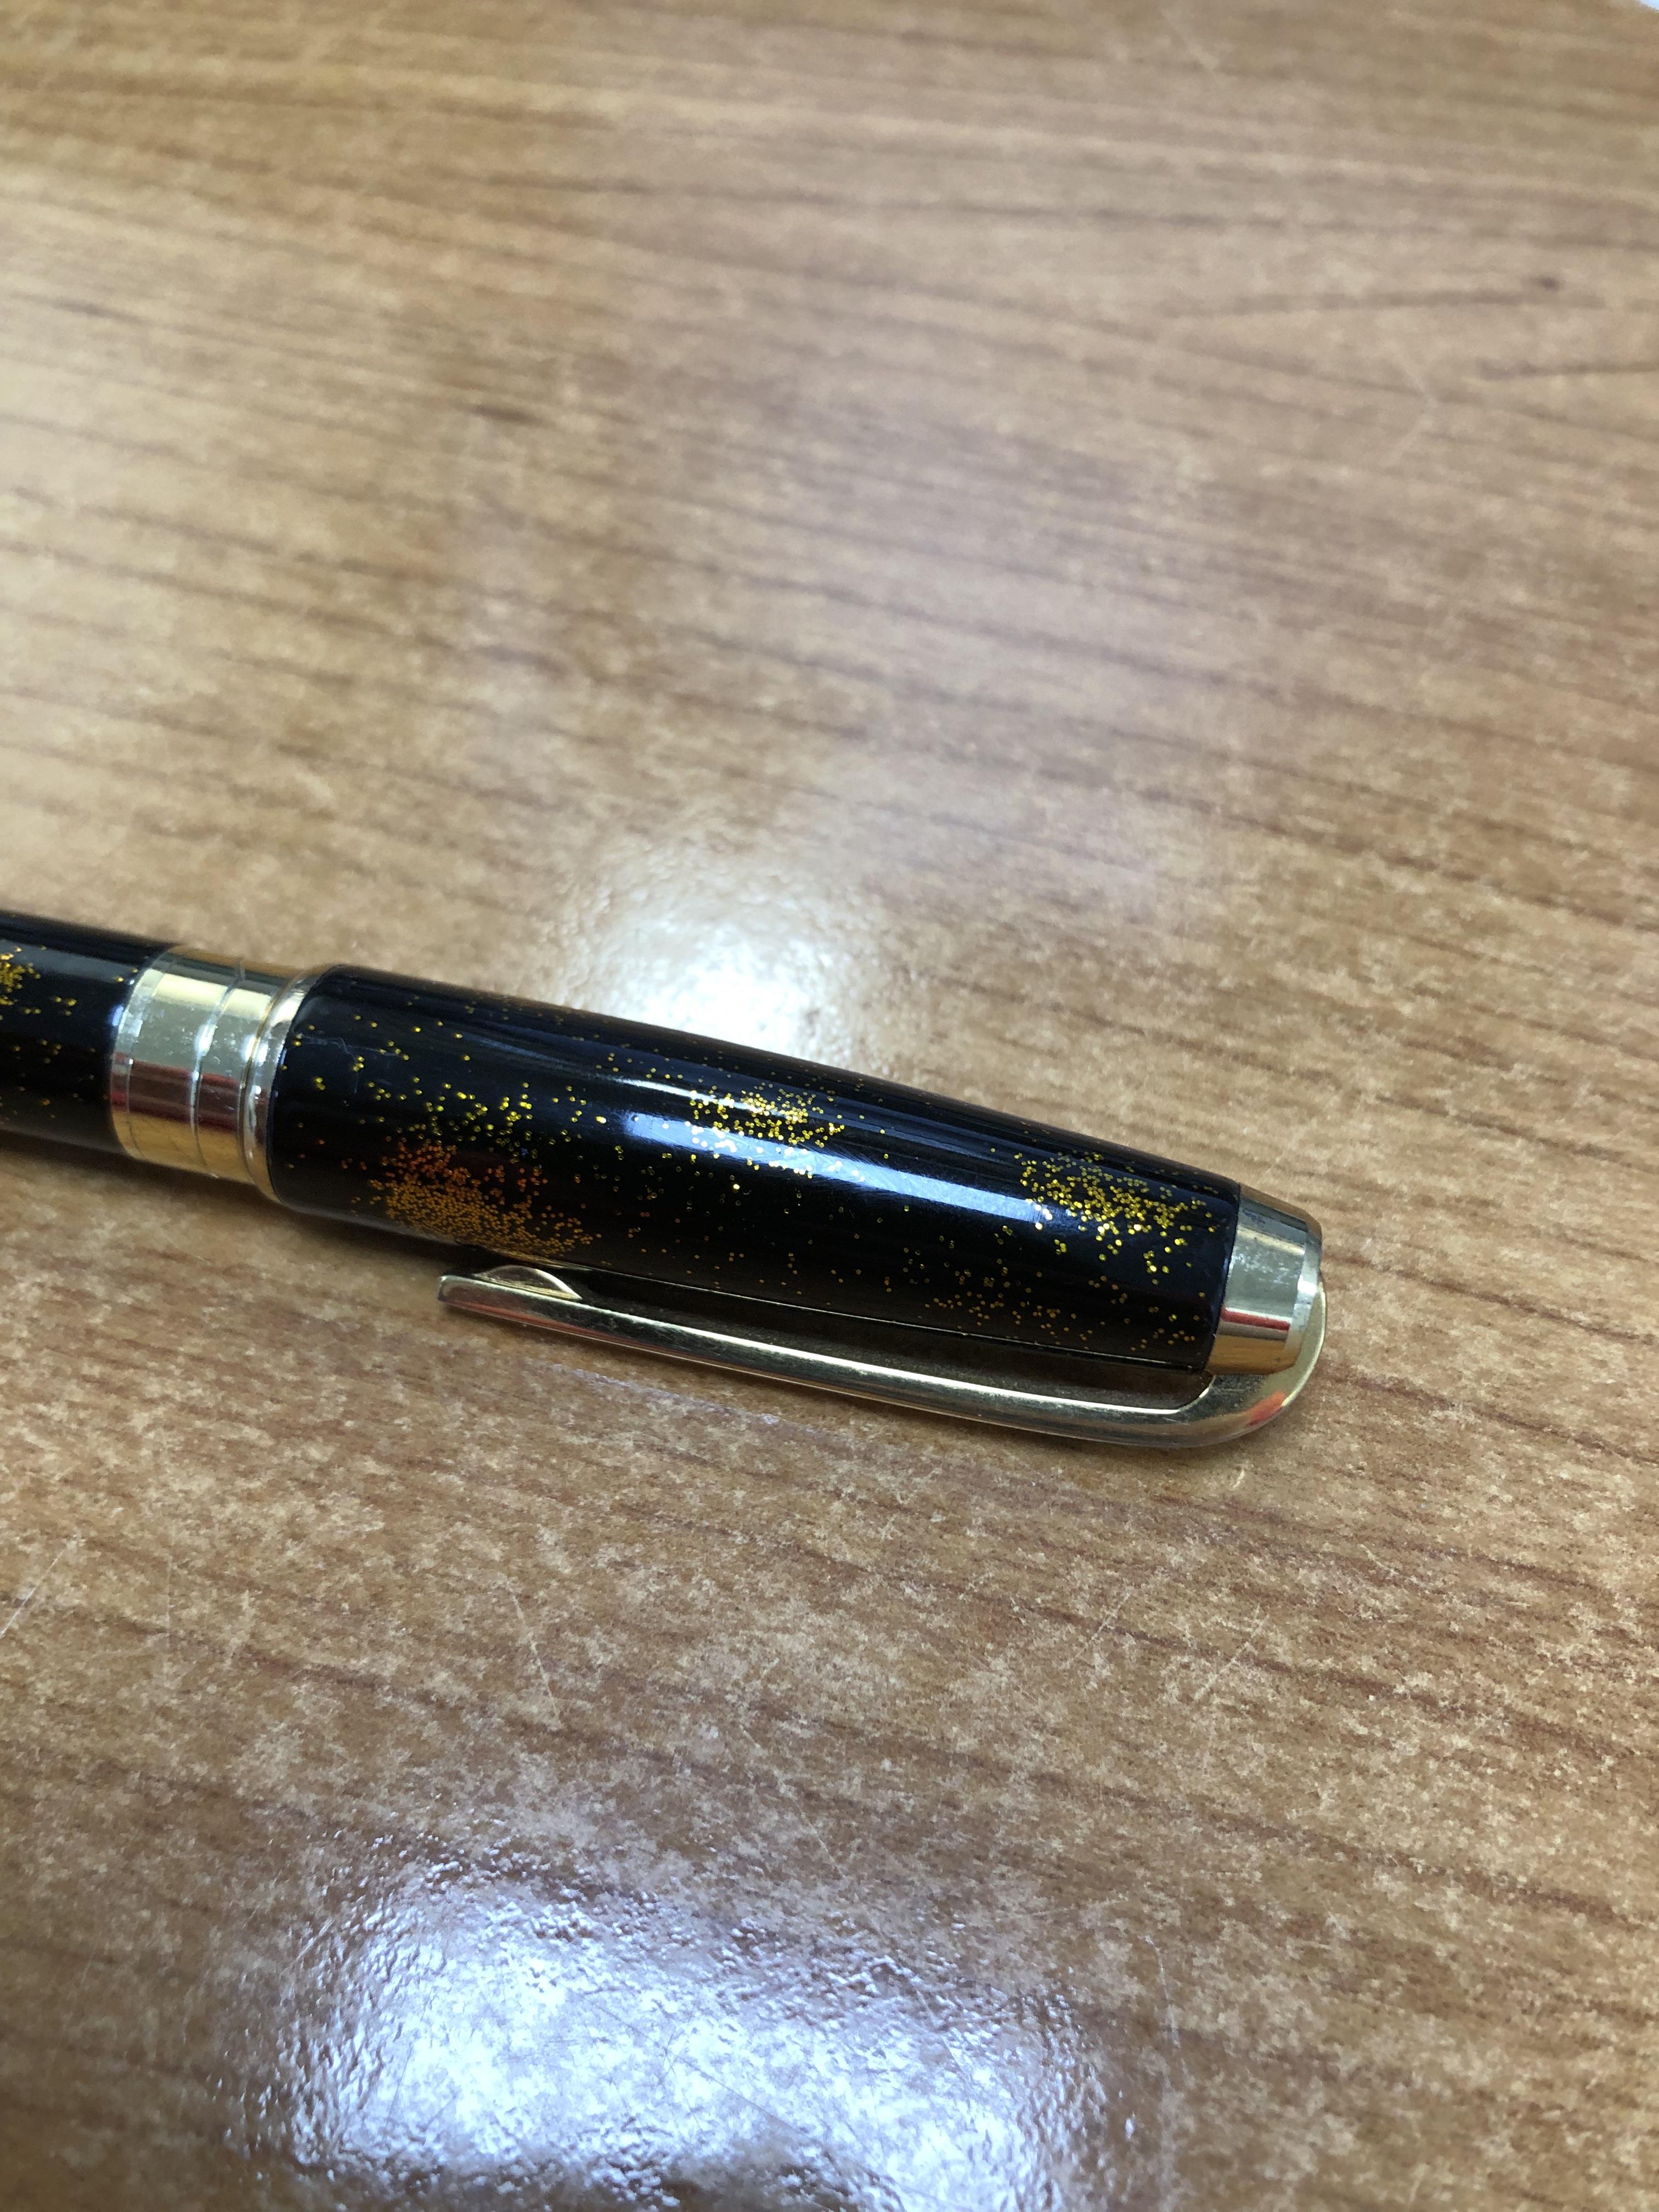 AN S.T. DUPONT PARIS OLYMPIO POUDRE D'OR FOUNTAIN PEN. BLACK WITH GOLD DUSTING, WITH AN 18ct GOLD - Image 2 of 3